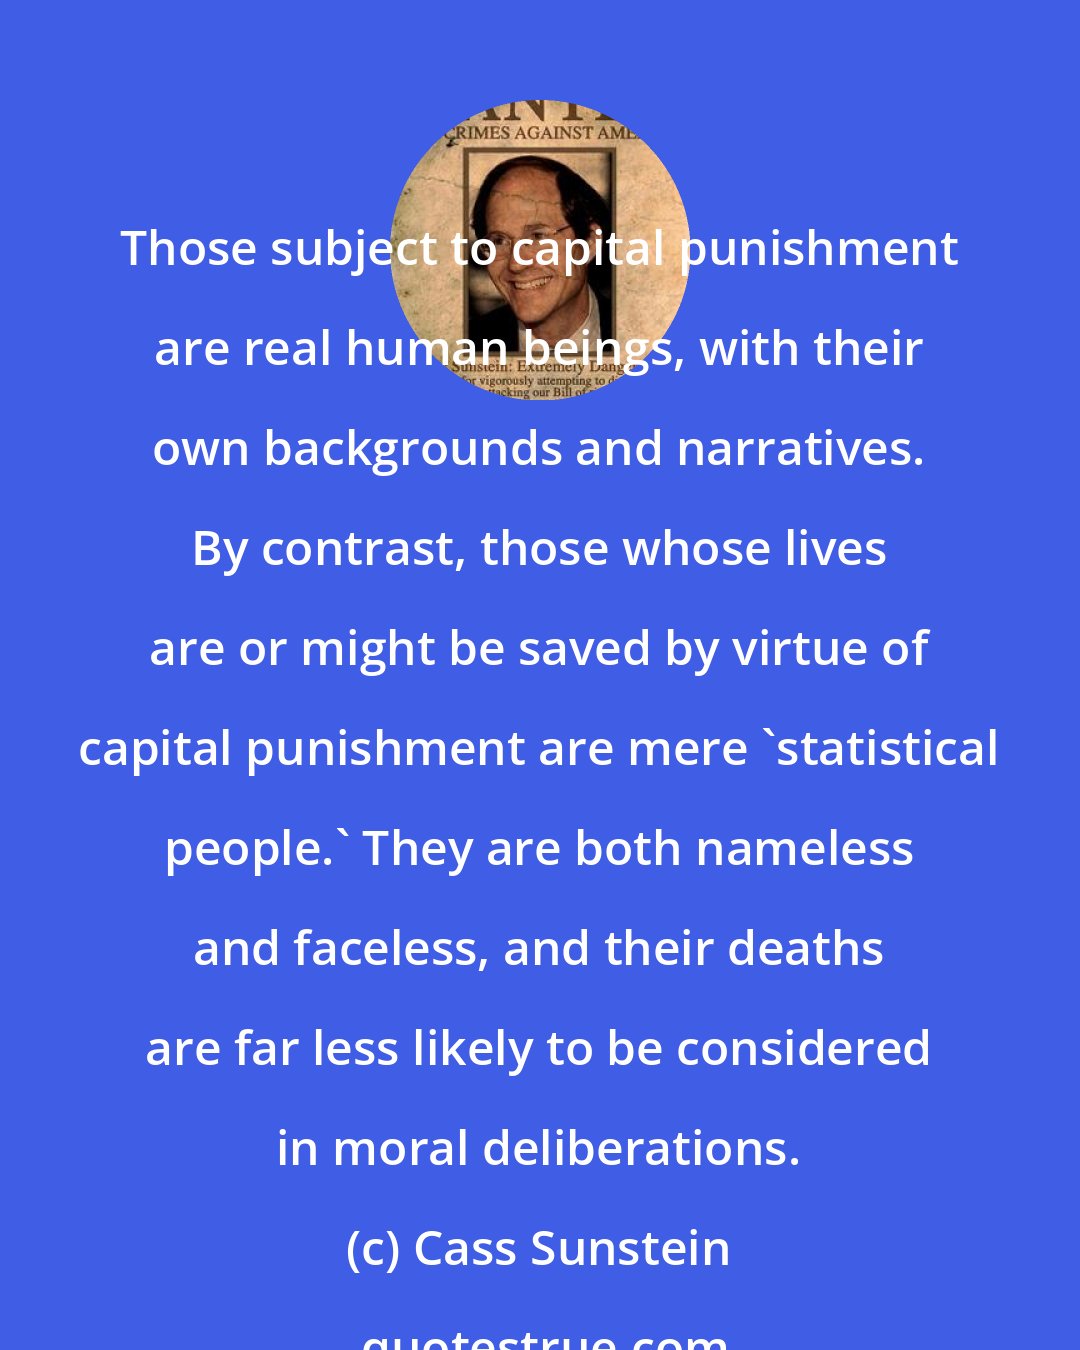 Cass Sunstein: Those subject to capital punishment are real human beings, with their own backgrounds and narratives. By contrast, those whose lives are or might be saved by virtue of capital punishment are mere 'statistical people.' They are both nameless and faceless, and their deaths are far less likely to be considered in moral deliberations.